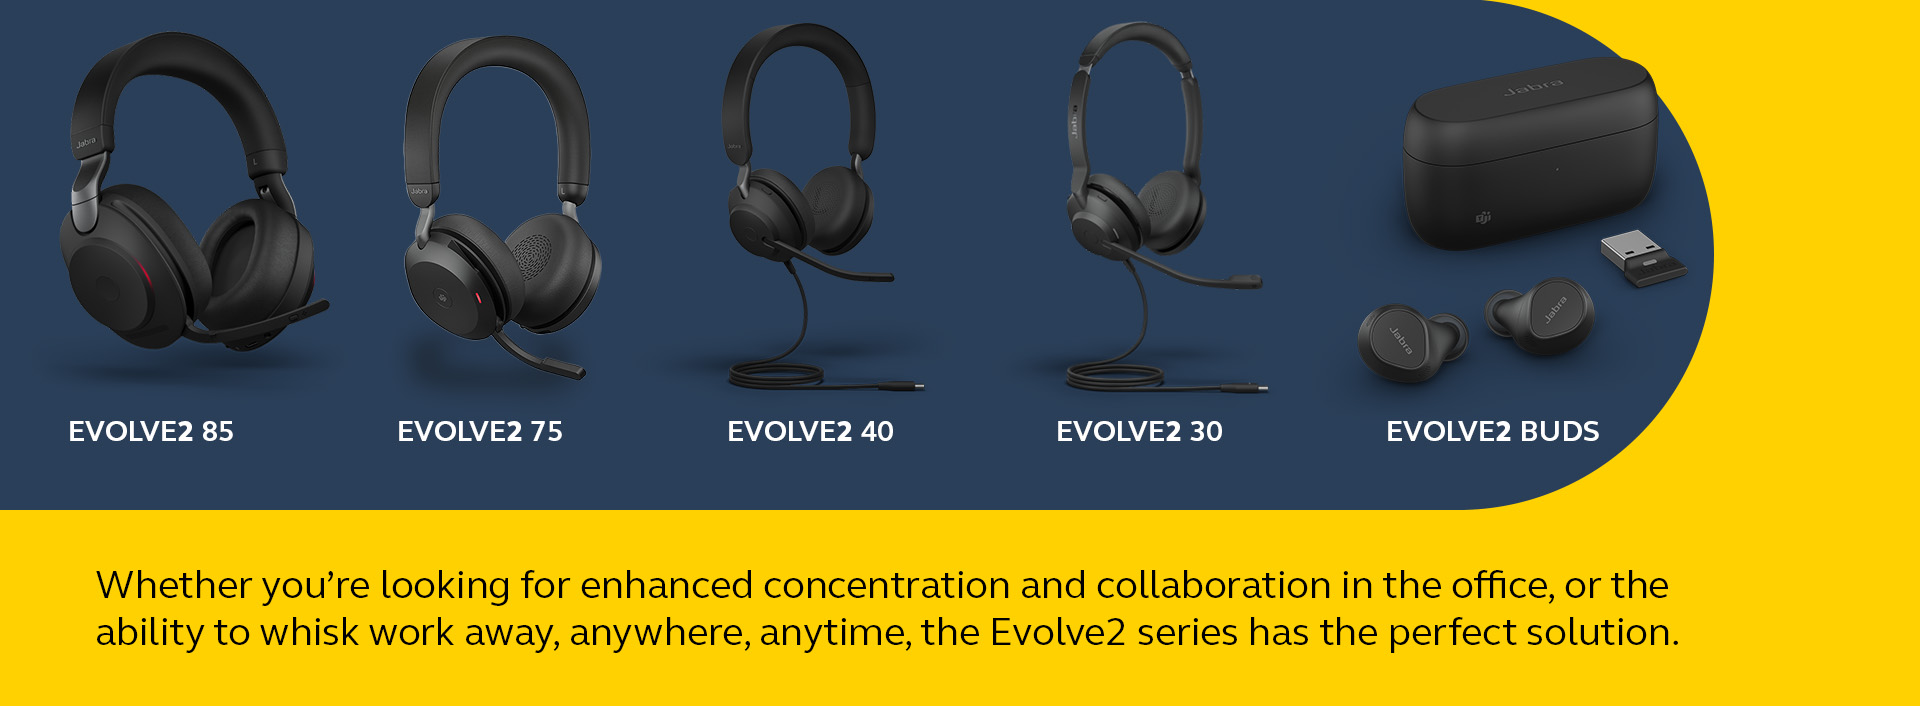 Evolve2 85, Evolve2 75, Evolve2 40, Evolve2 30, Evolve2 Buds - Whether you're looking for enhanced concentratoin and collaboration in the office, or the ability to whisk work away, anywhere, anytime, the Evolve2 series has the perfect solution.